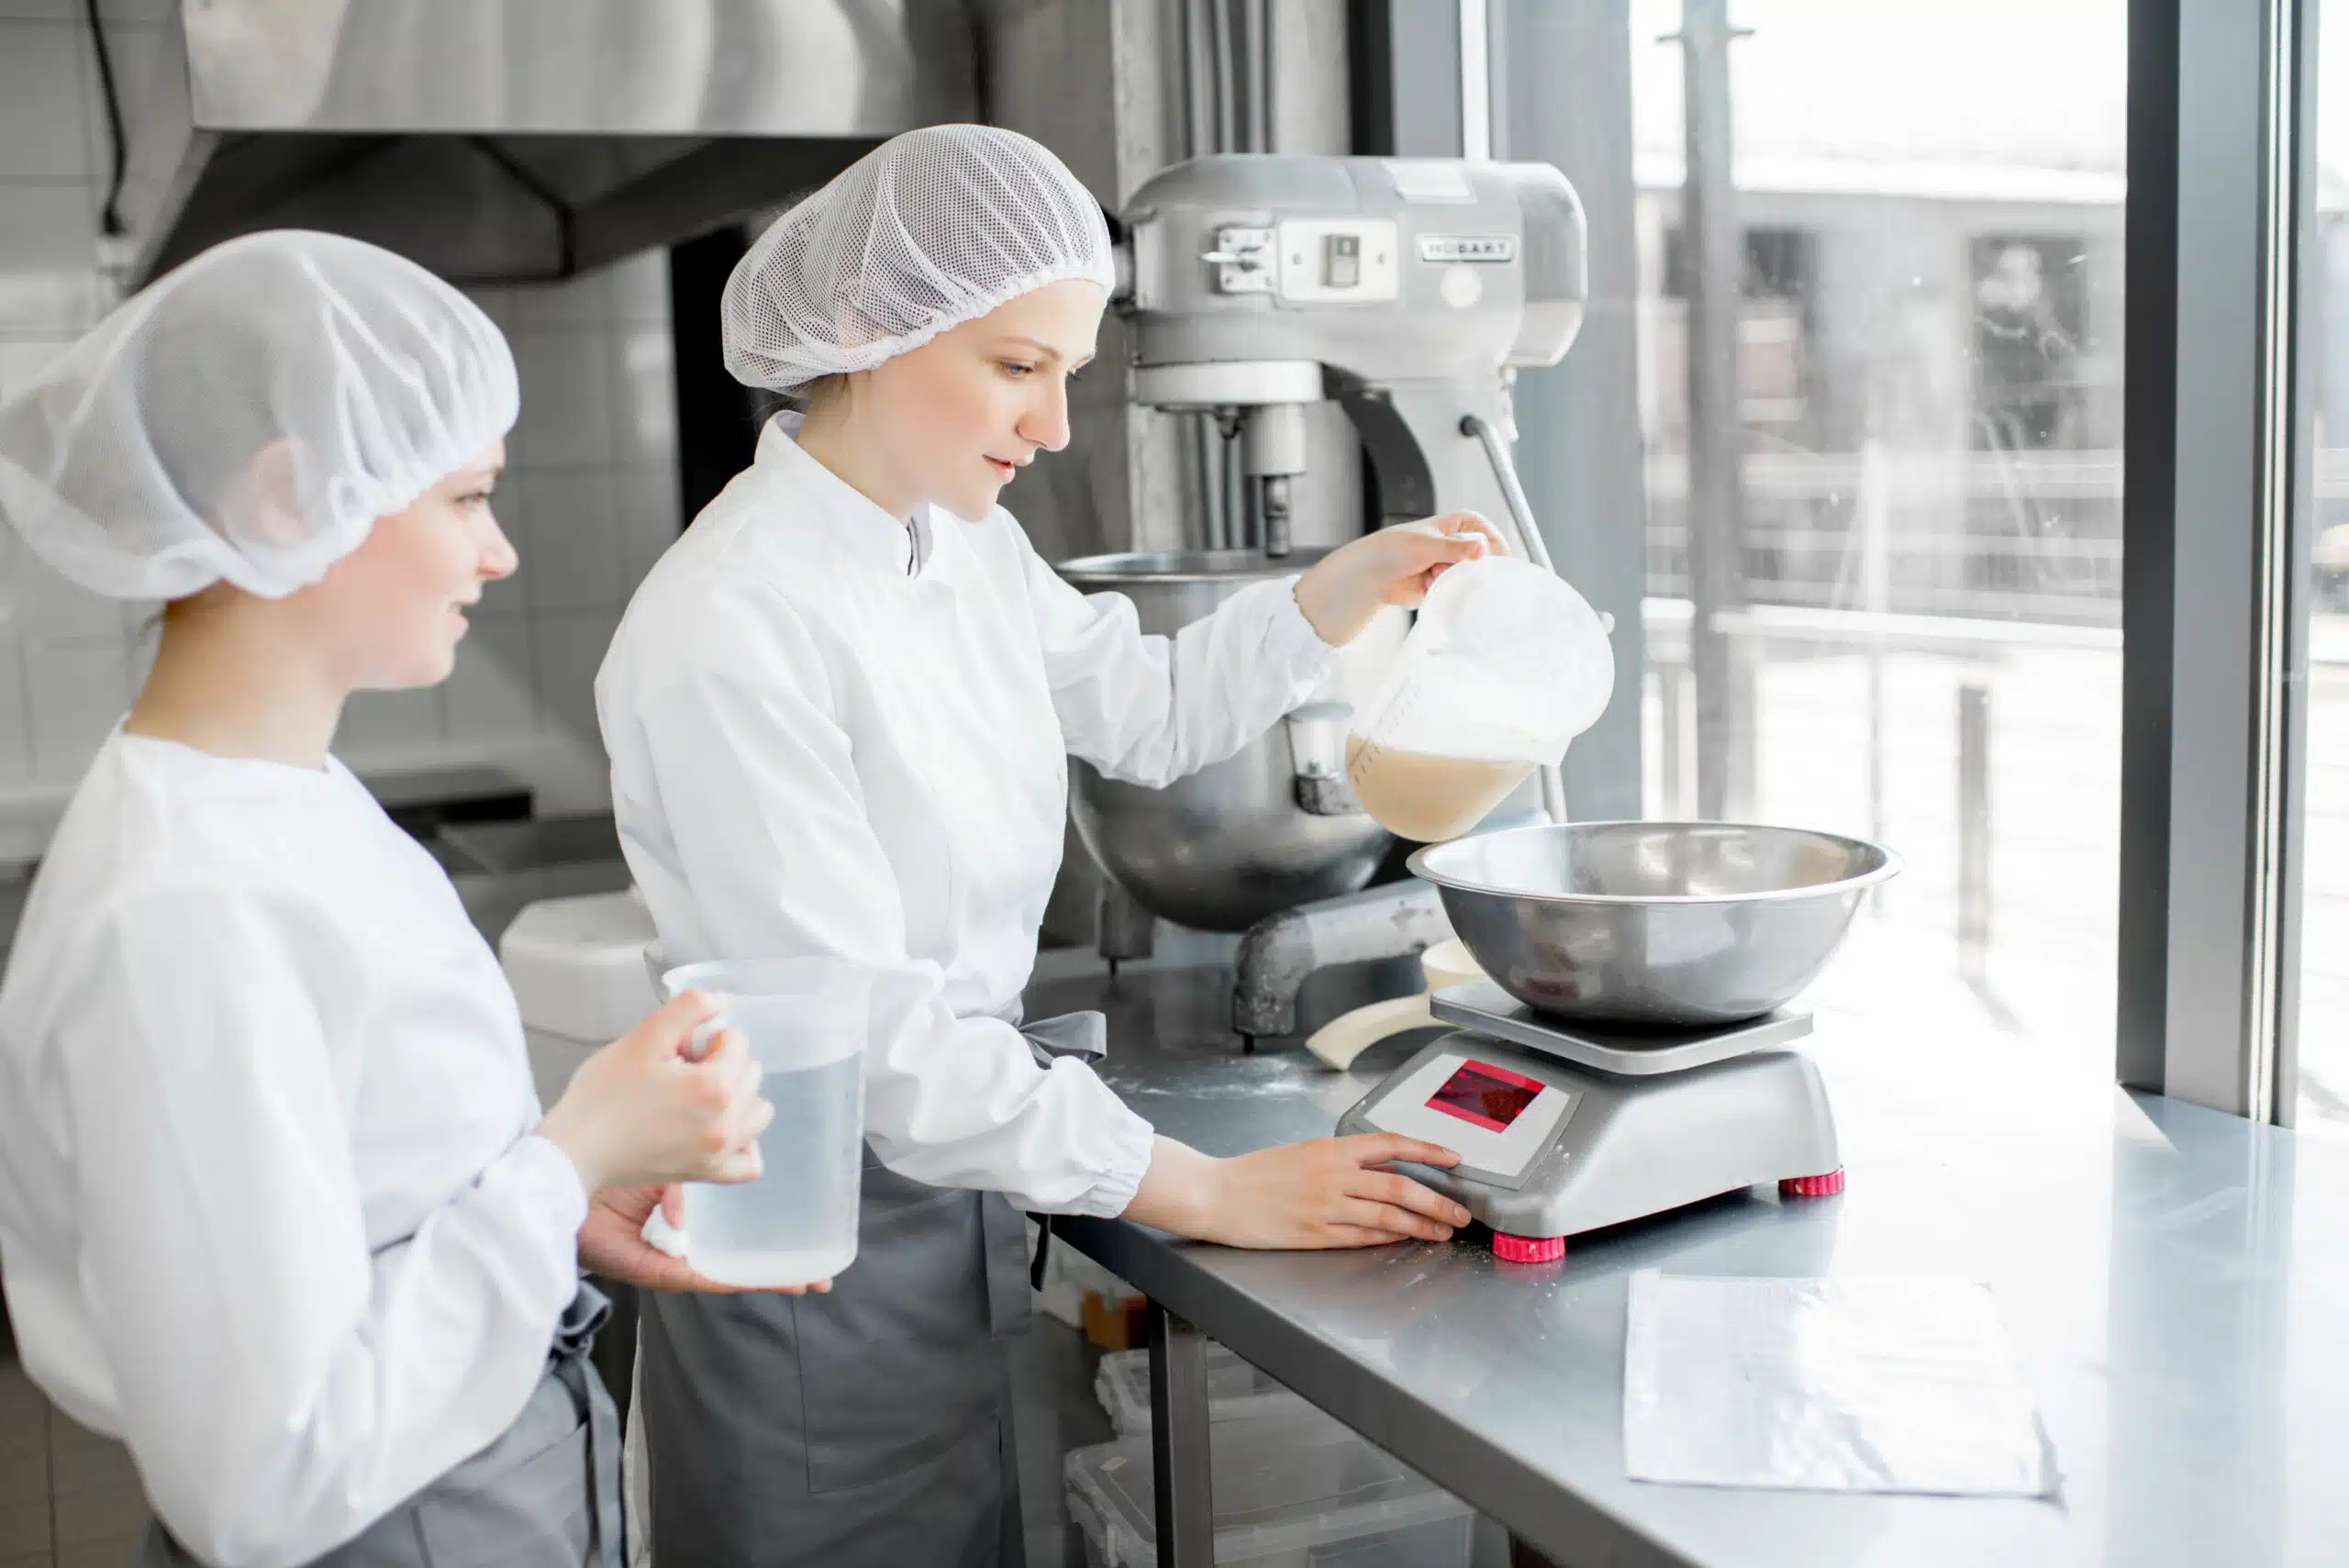 Two female confectioners in uniform weighing ingredients for pastry working at the bakery manufacturing